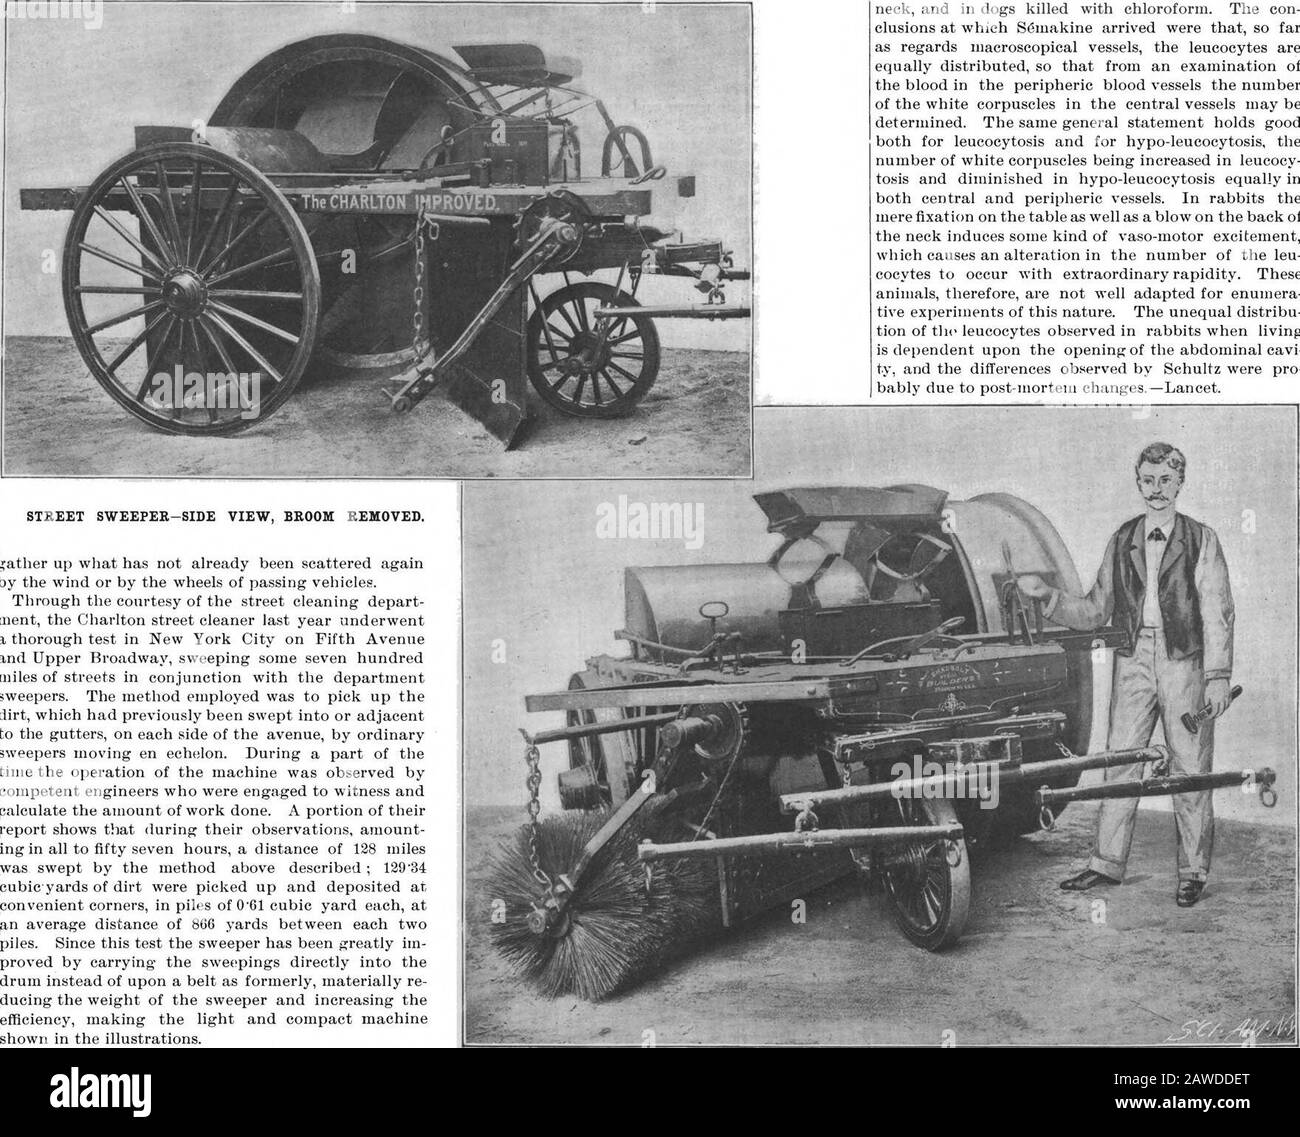 Scientific American Volume 76 Number 13 (March 1897) . taken to ormoved from the field, or raised therefrom, as shown inthe illustration, when the cultivator is in workingposition. Coupled at one side to the main cultivatorshaft is an extension shaft, also carrying cultivatorteeth, the teeth being shorter near the outer end of theshaft, and this exterior shaft is supported by a yokeframe extending out laterally from the main frame.The main cultivator shaft and its extension are rotatedby sprocket wheels and chains from the main axle, thecultivator teeth passing between the teeth of the cleaner Stock Photo